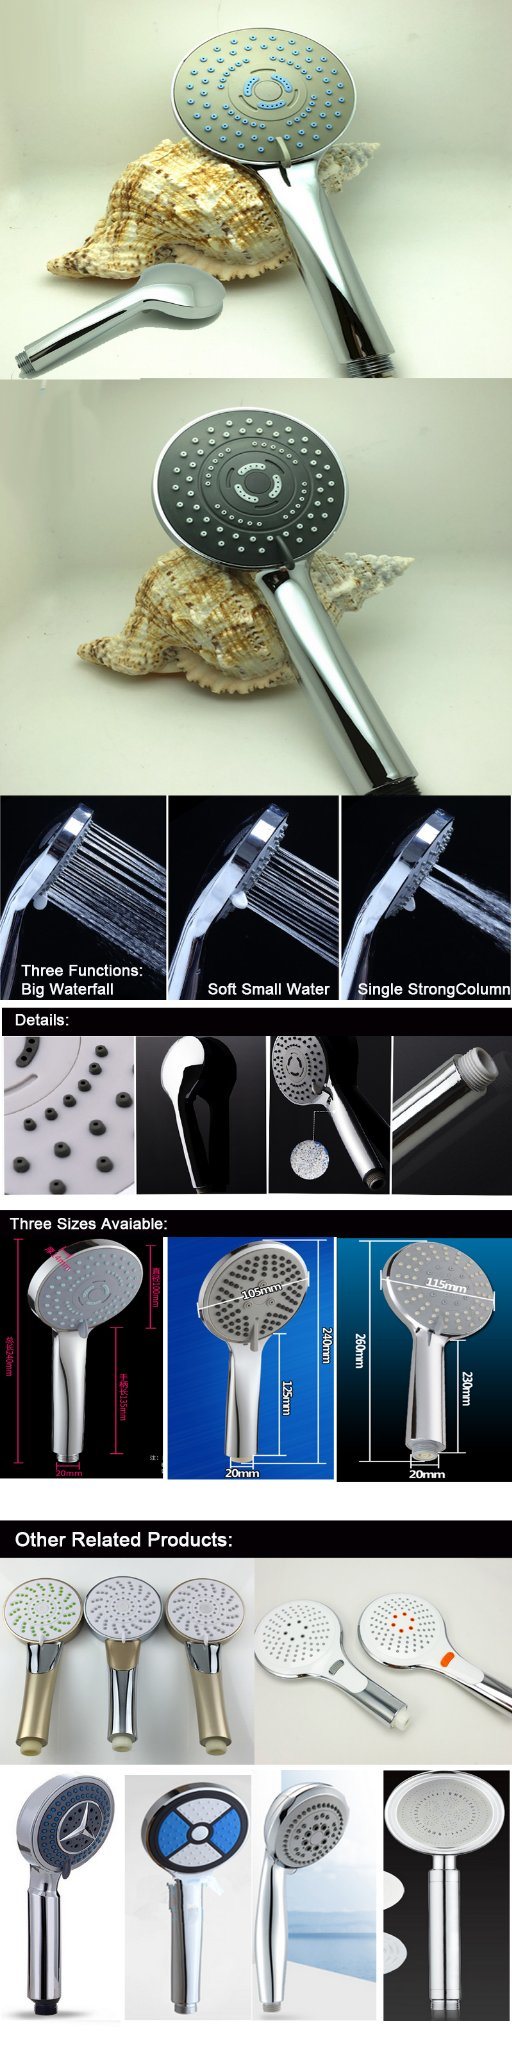 High Pressure Water Saving Hand LED Shower Head with Filter Bath Shower Nozzle